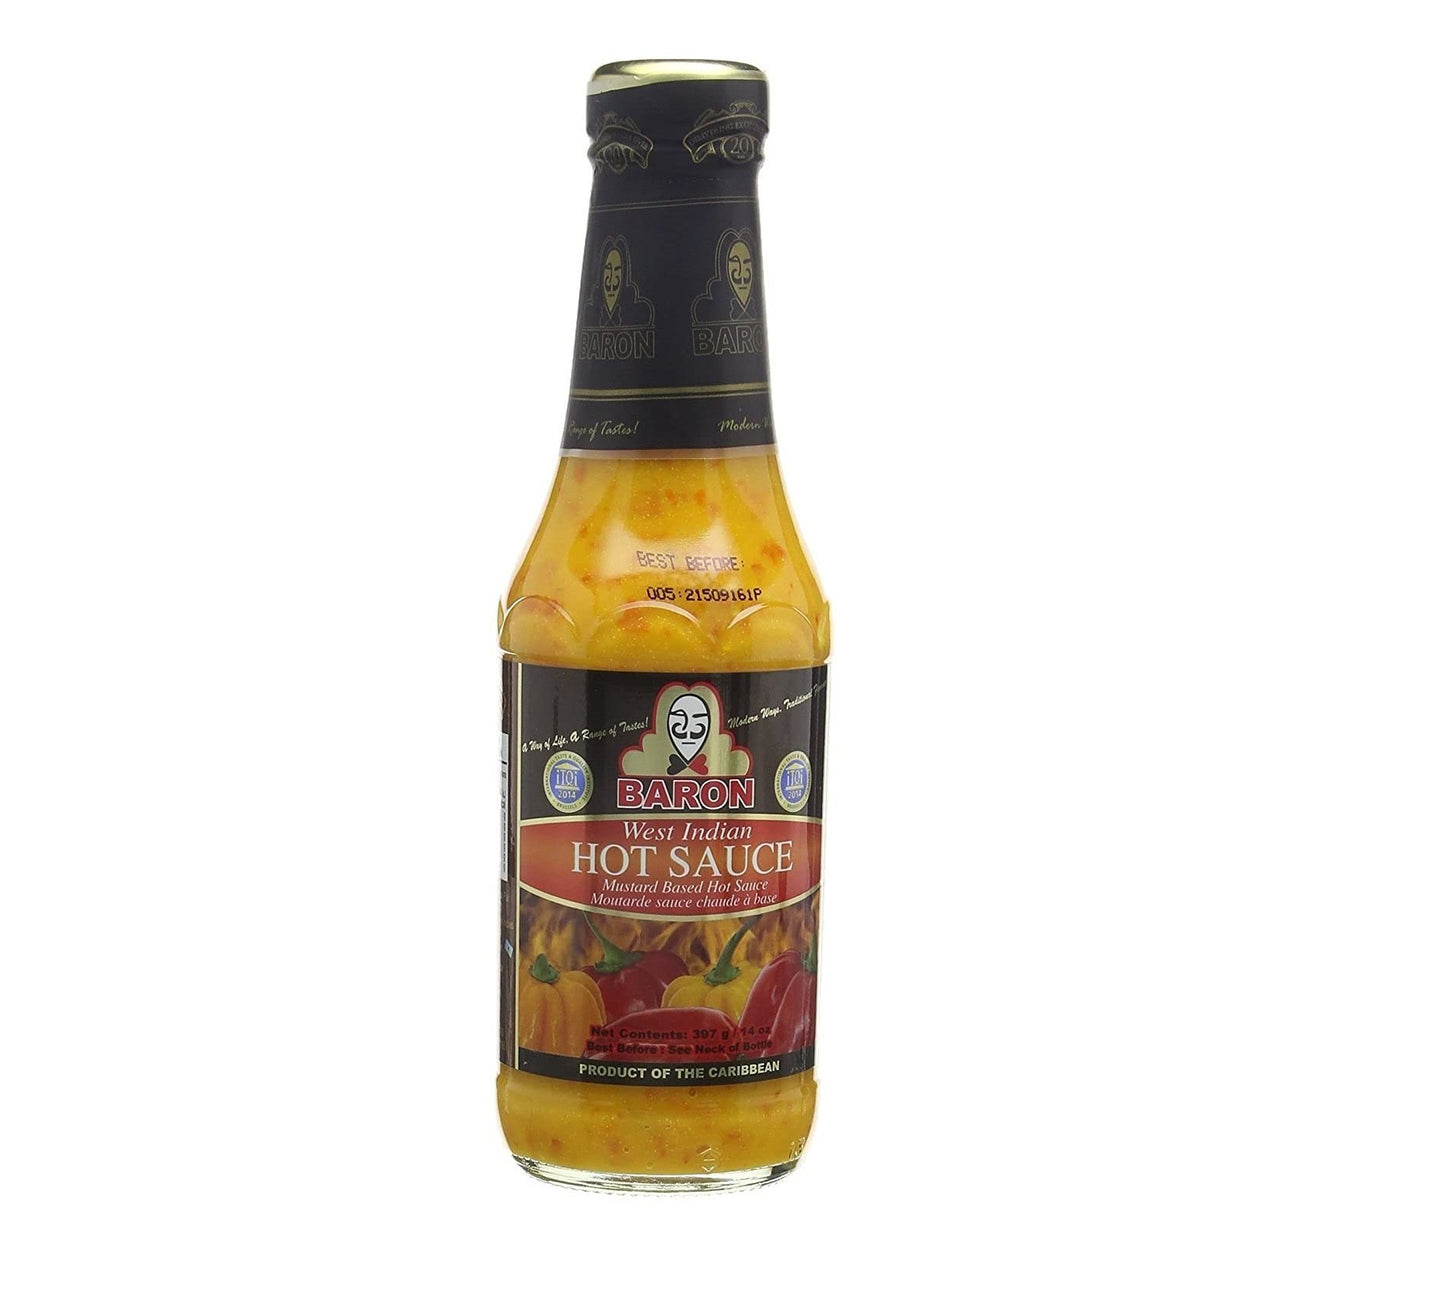 Baron West Indian Hot Sauce 397g Box of 6